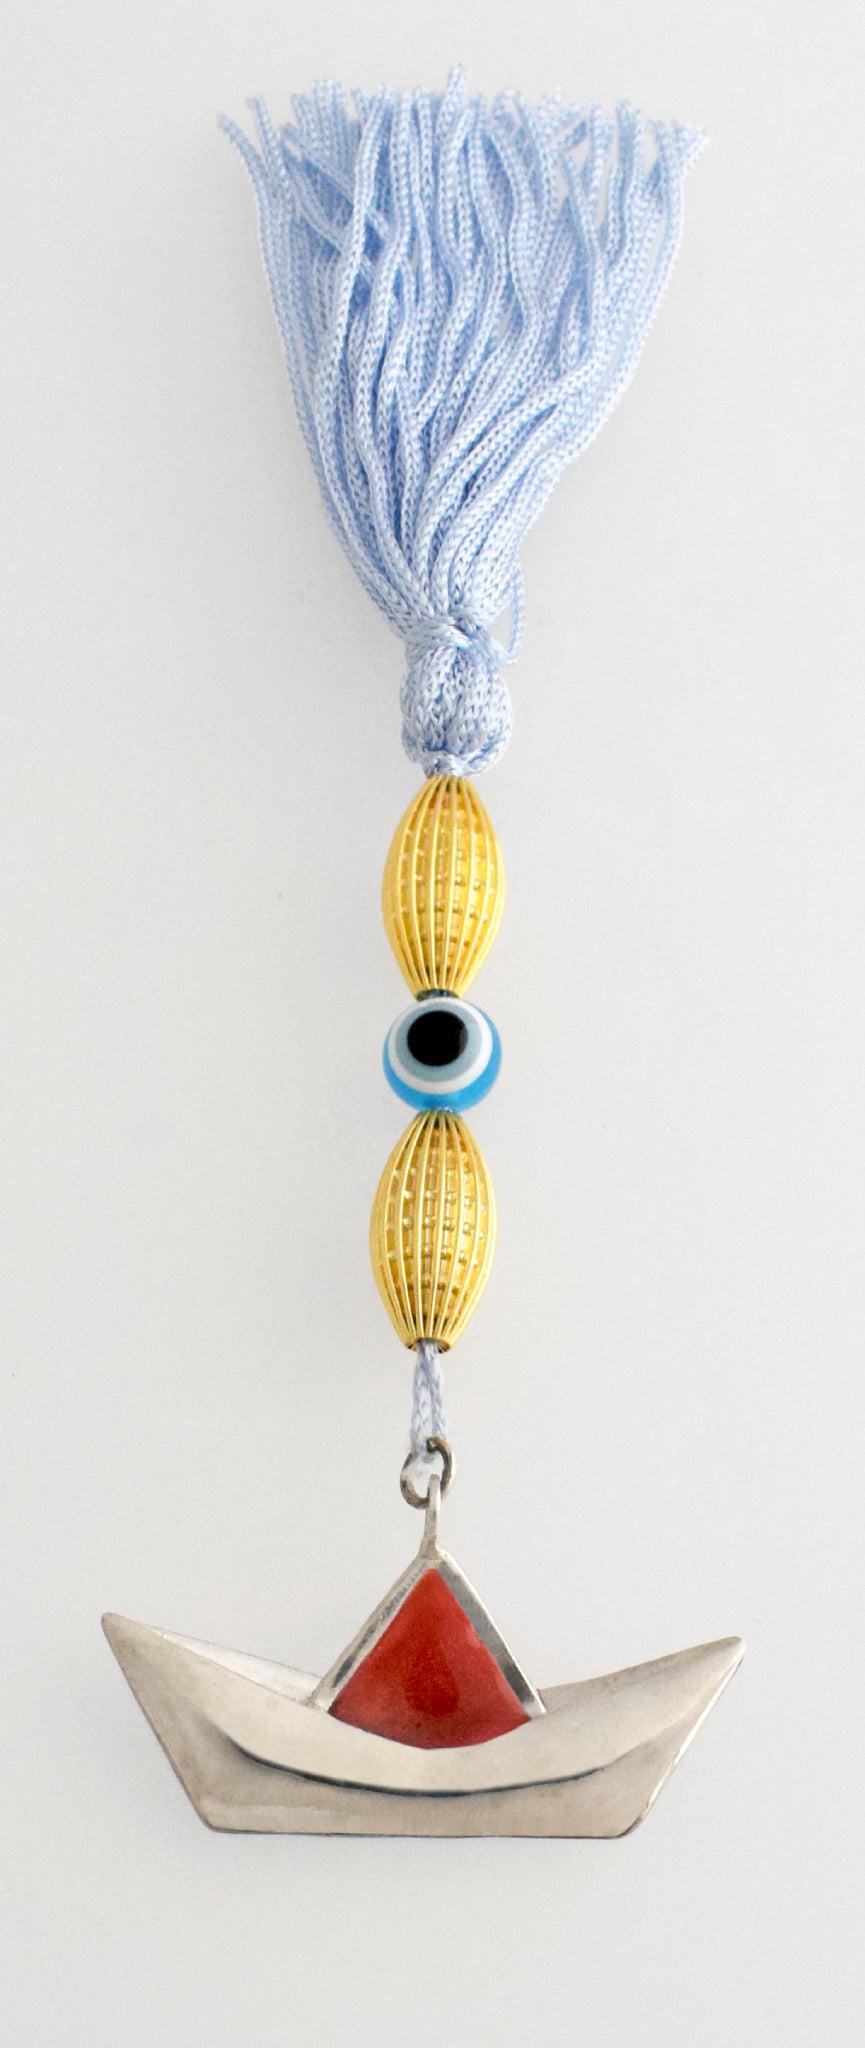 Evil Eye Charm on a tassel, House decoration, holiday decor, welcome gift, silver charm, Sailboat Charm (GK-02)